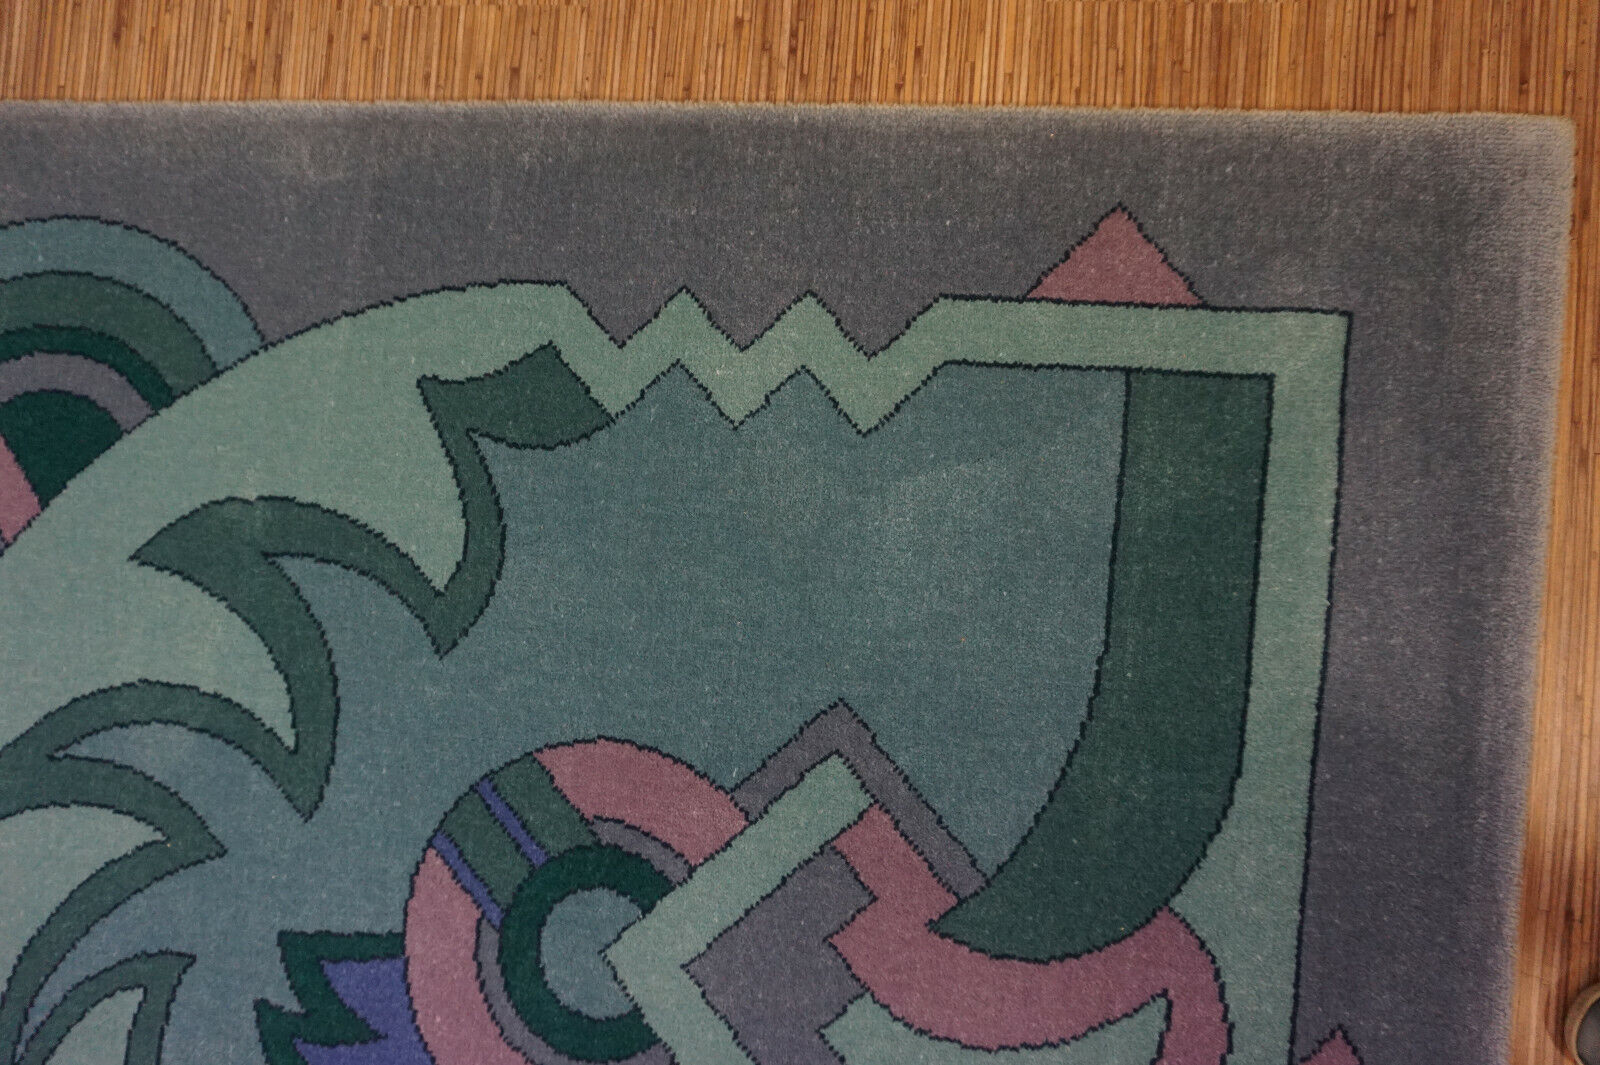 Detailed view of the rug's corner - Highlighting the corner of the rug to showcase its sturdy construction and neat finishing.